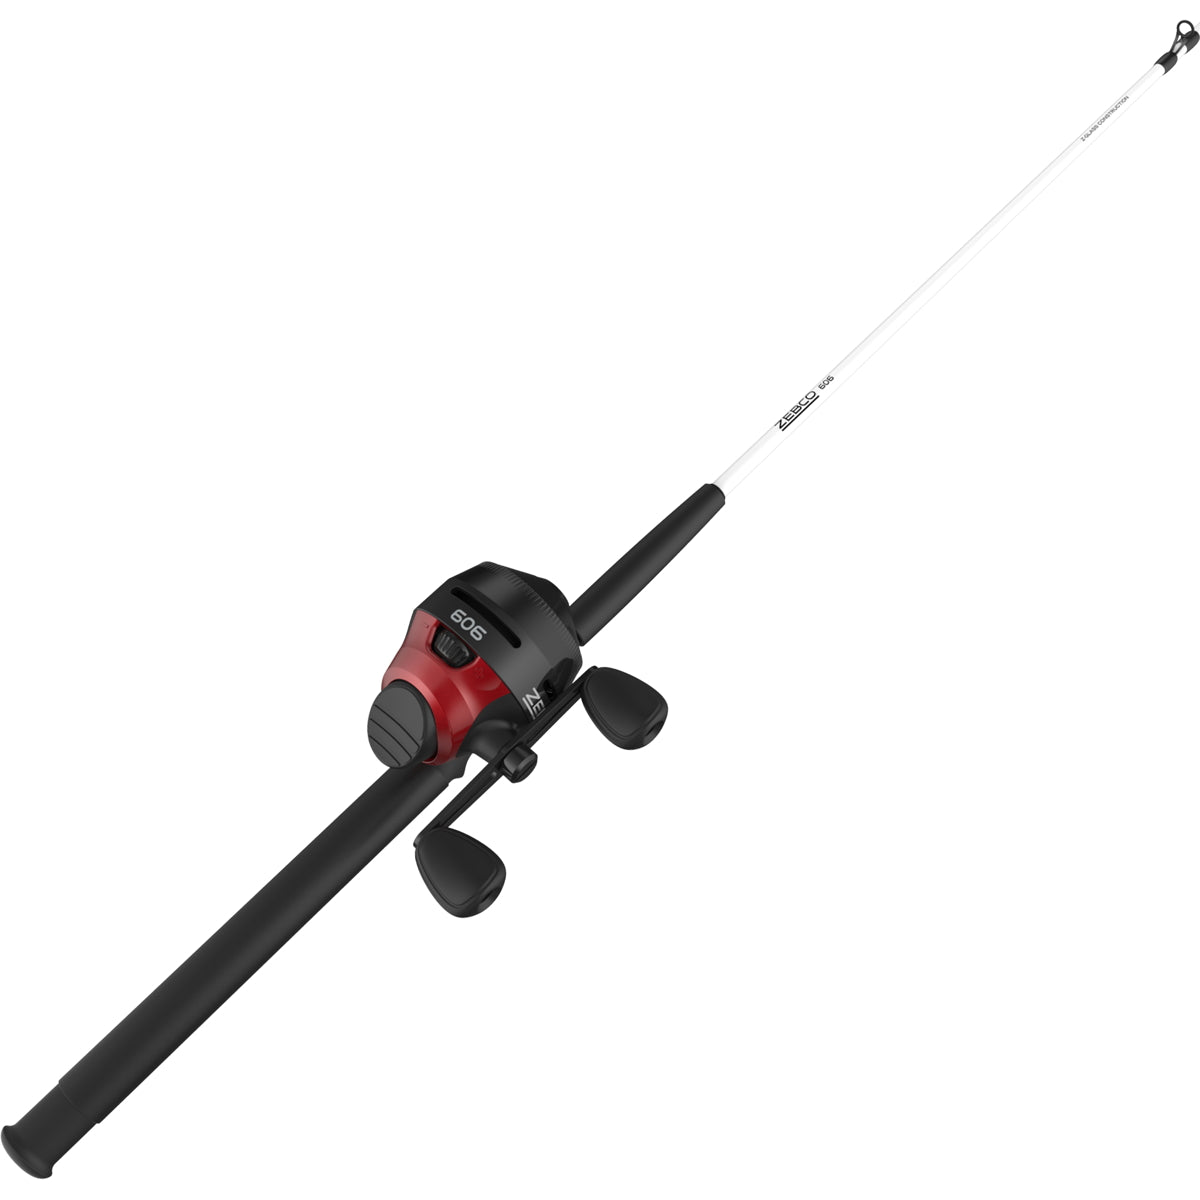 Photo of Zebco 606/662MH Spincast Combo for sale at United Tackle Shops.